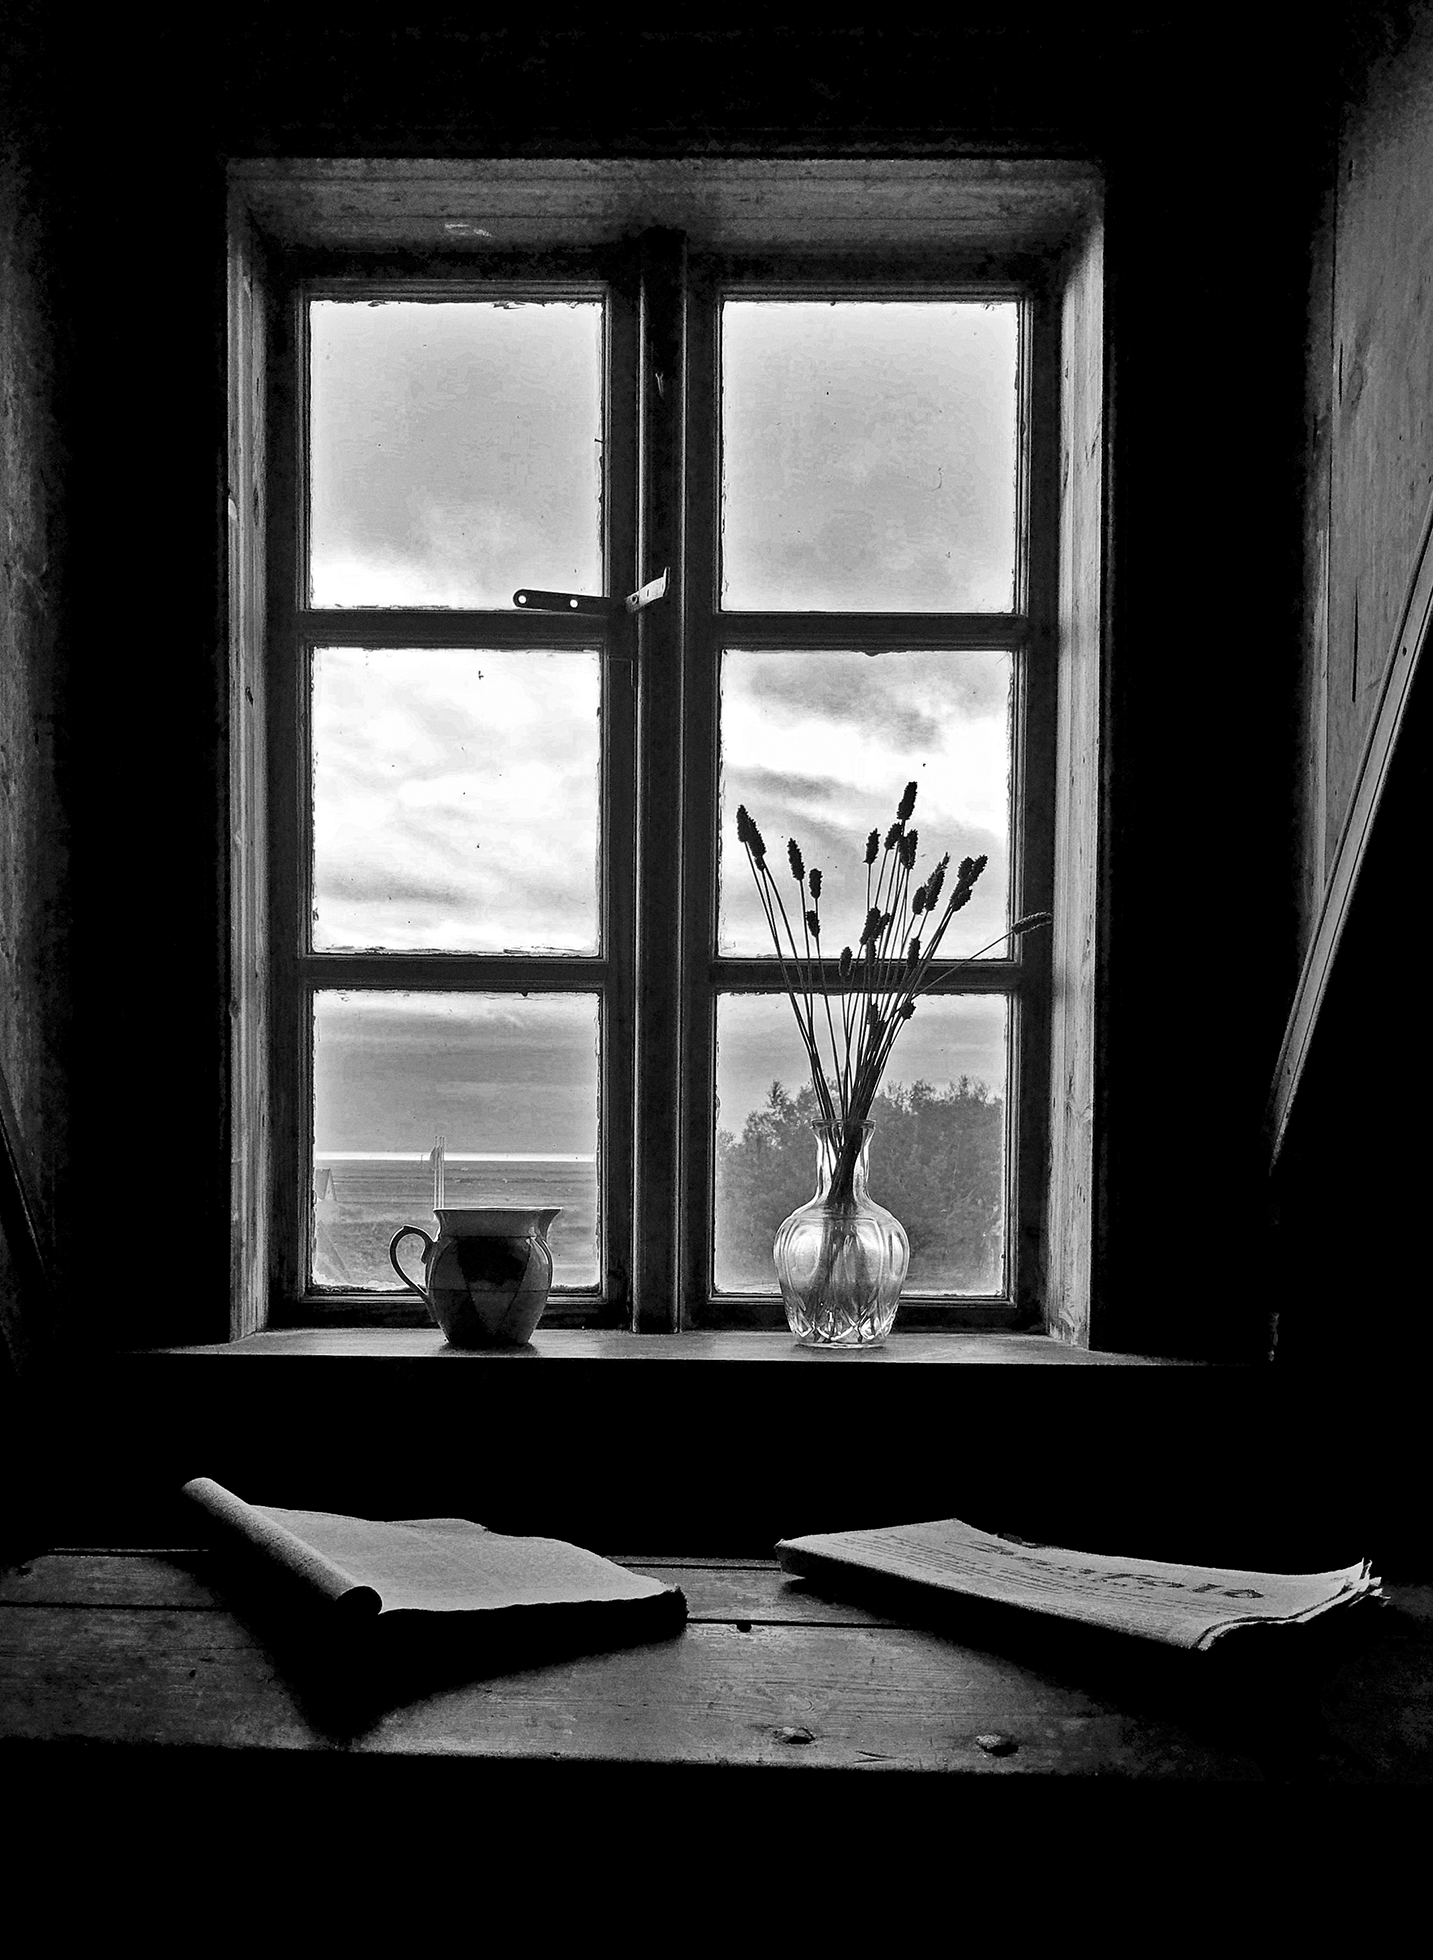 A clear vase with tall, slender flowers and a small pitcher sit on a windowsill. The lighting illuminates just enough of the interior to see an opened book and a folded newspaper on a bench in front of the windowsill.